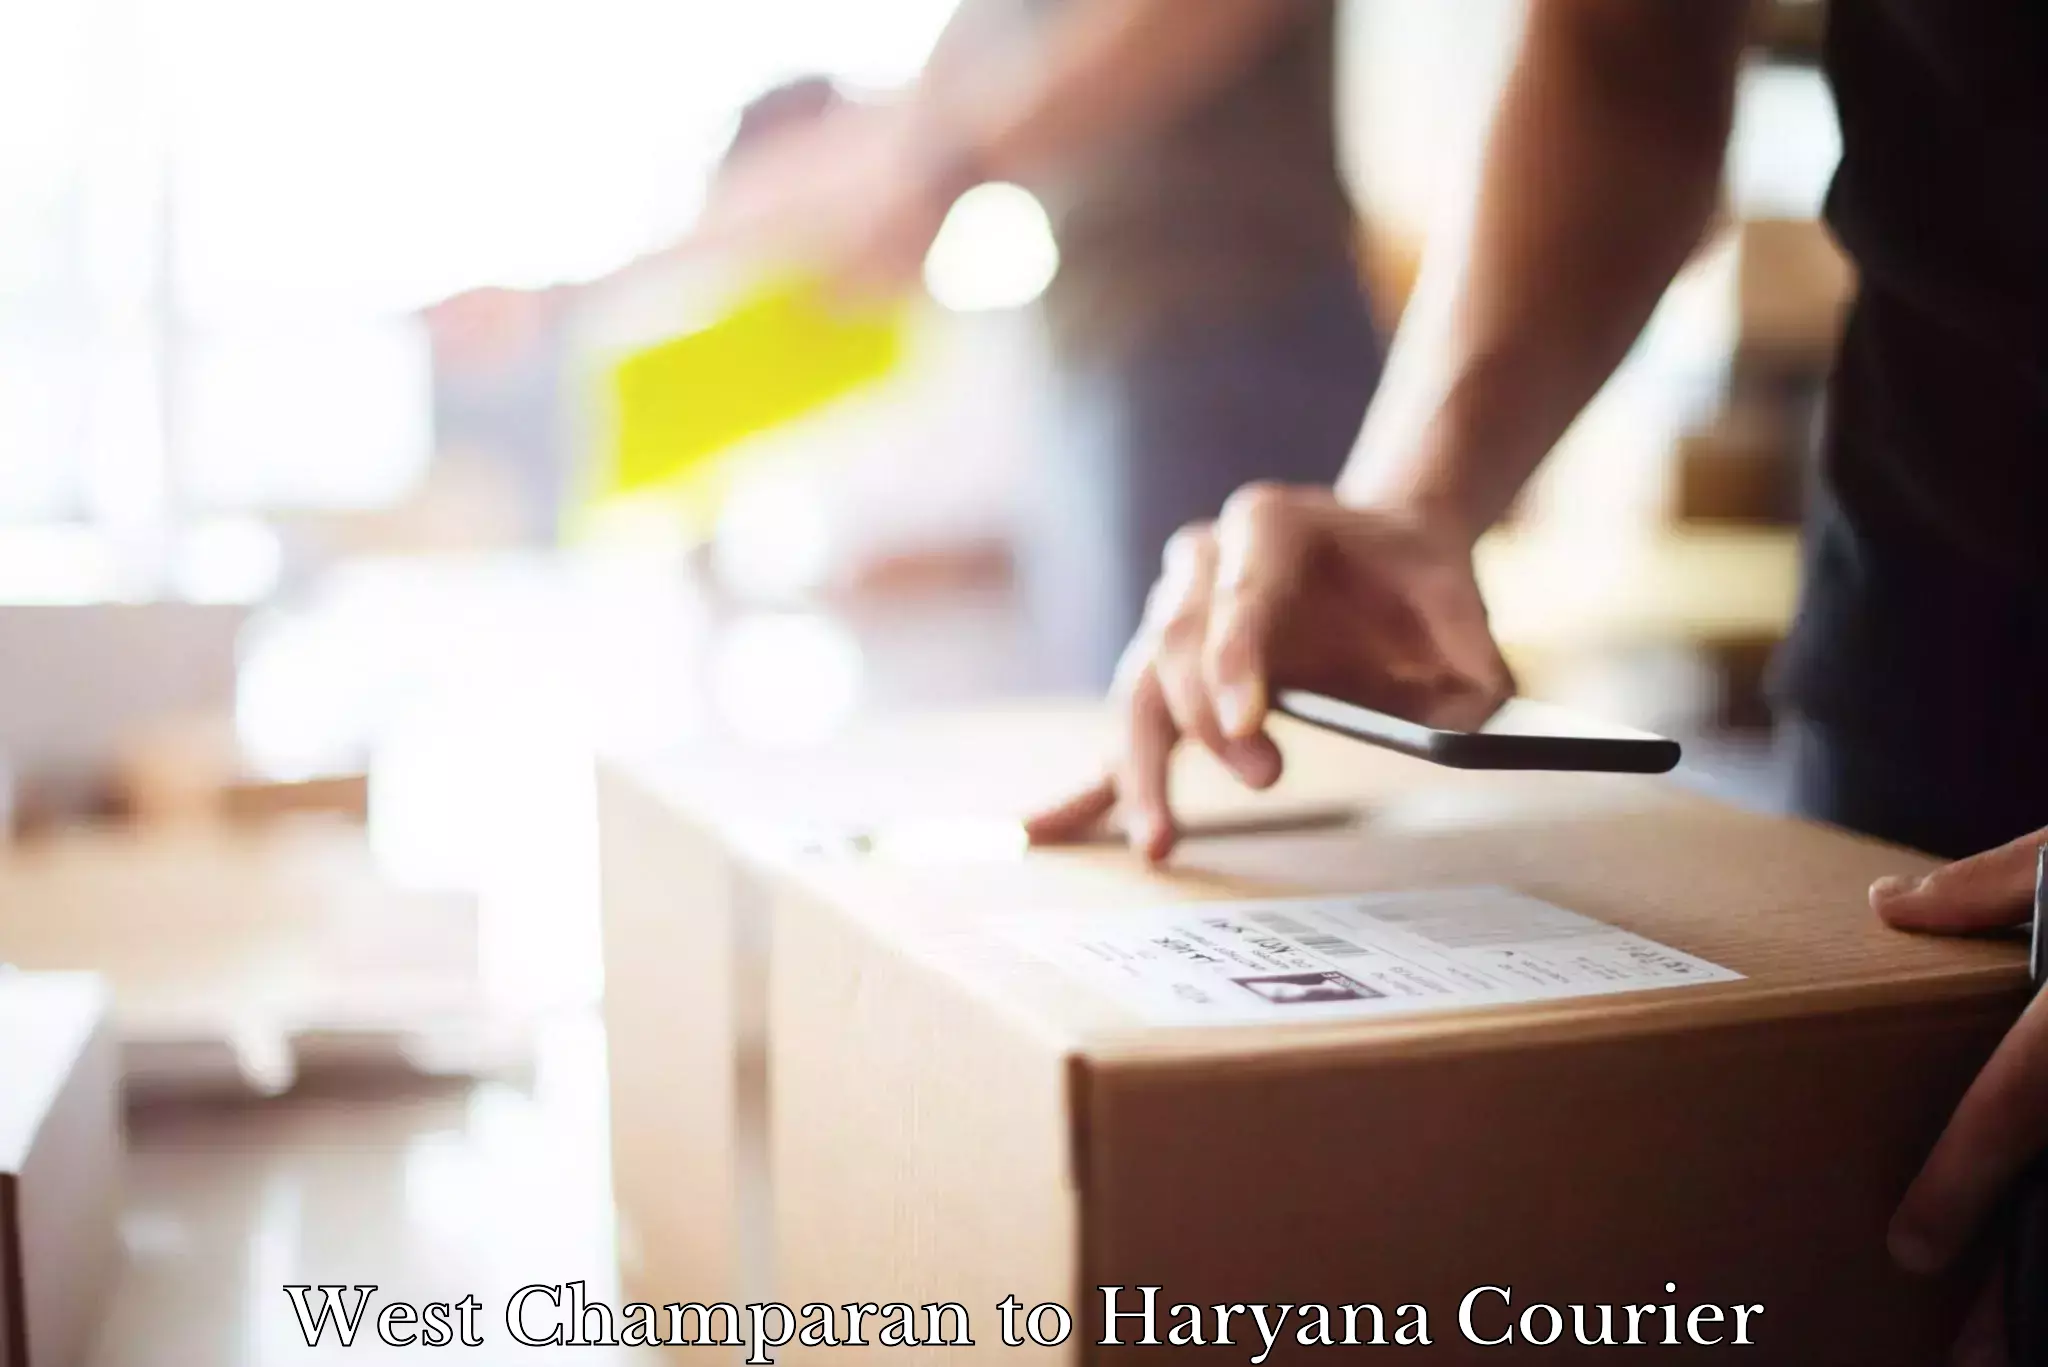 Courier tracking online in West Champaran to Hansi